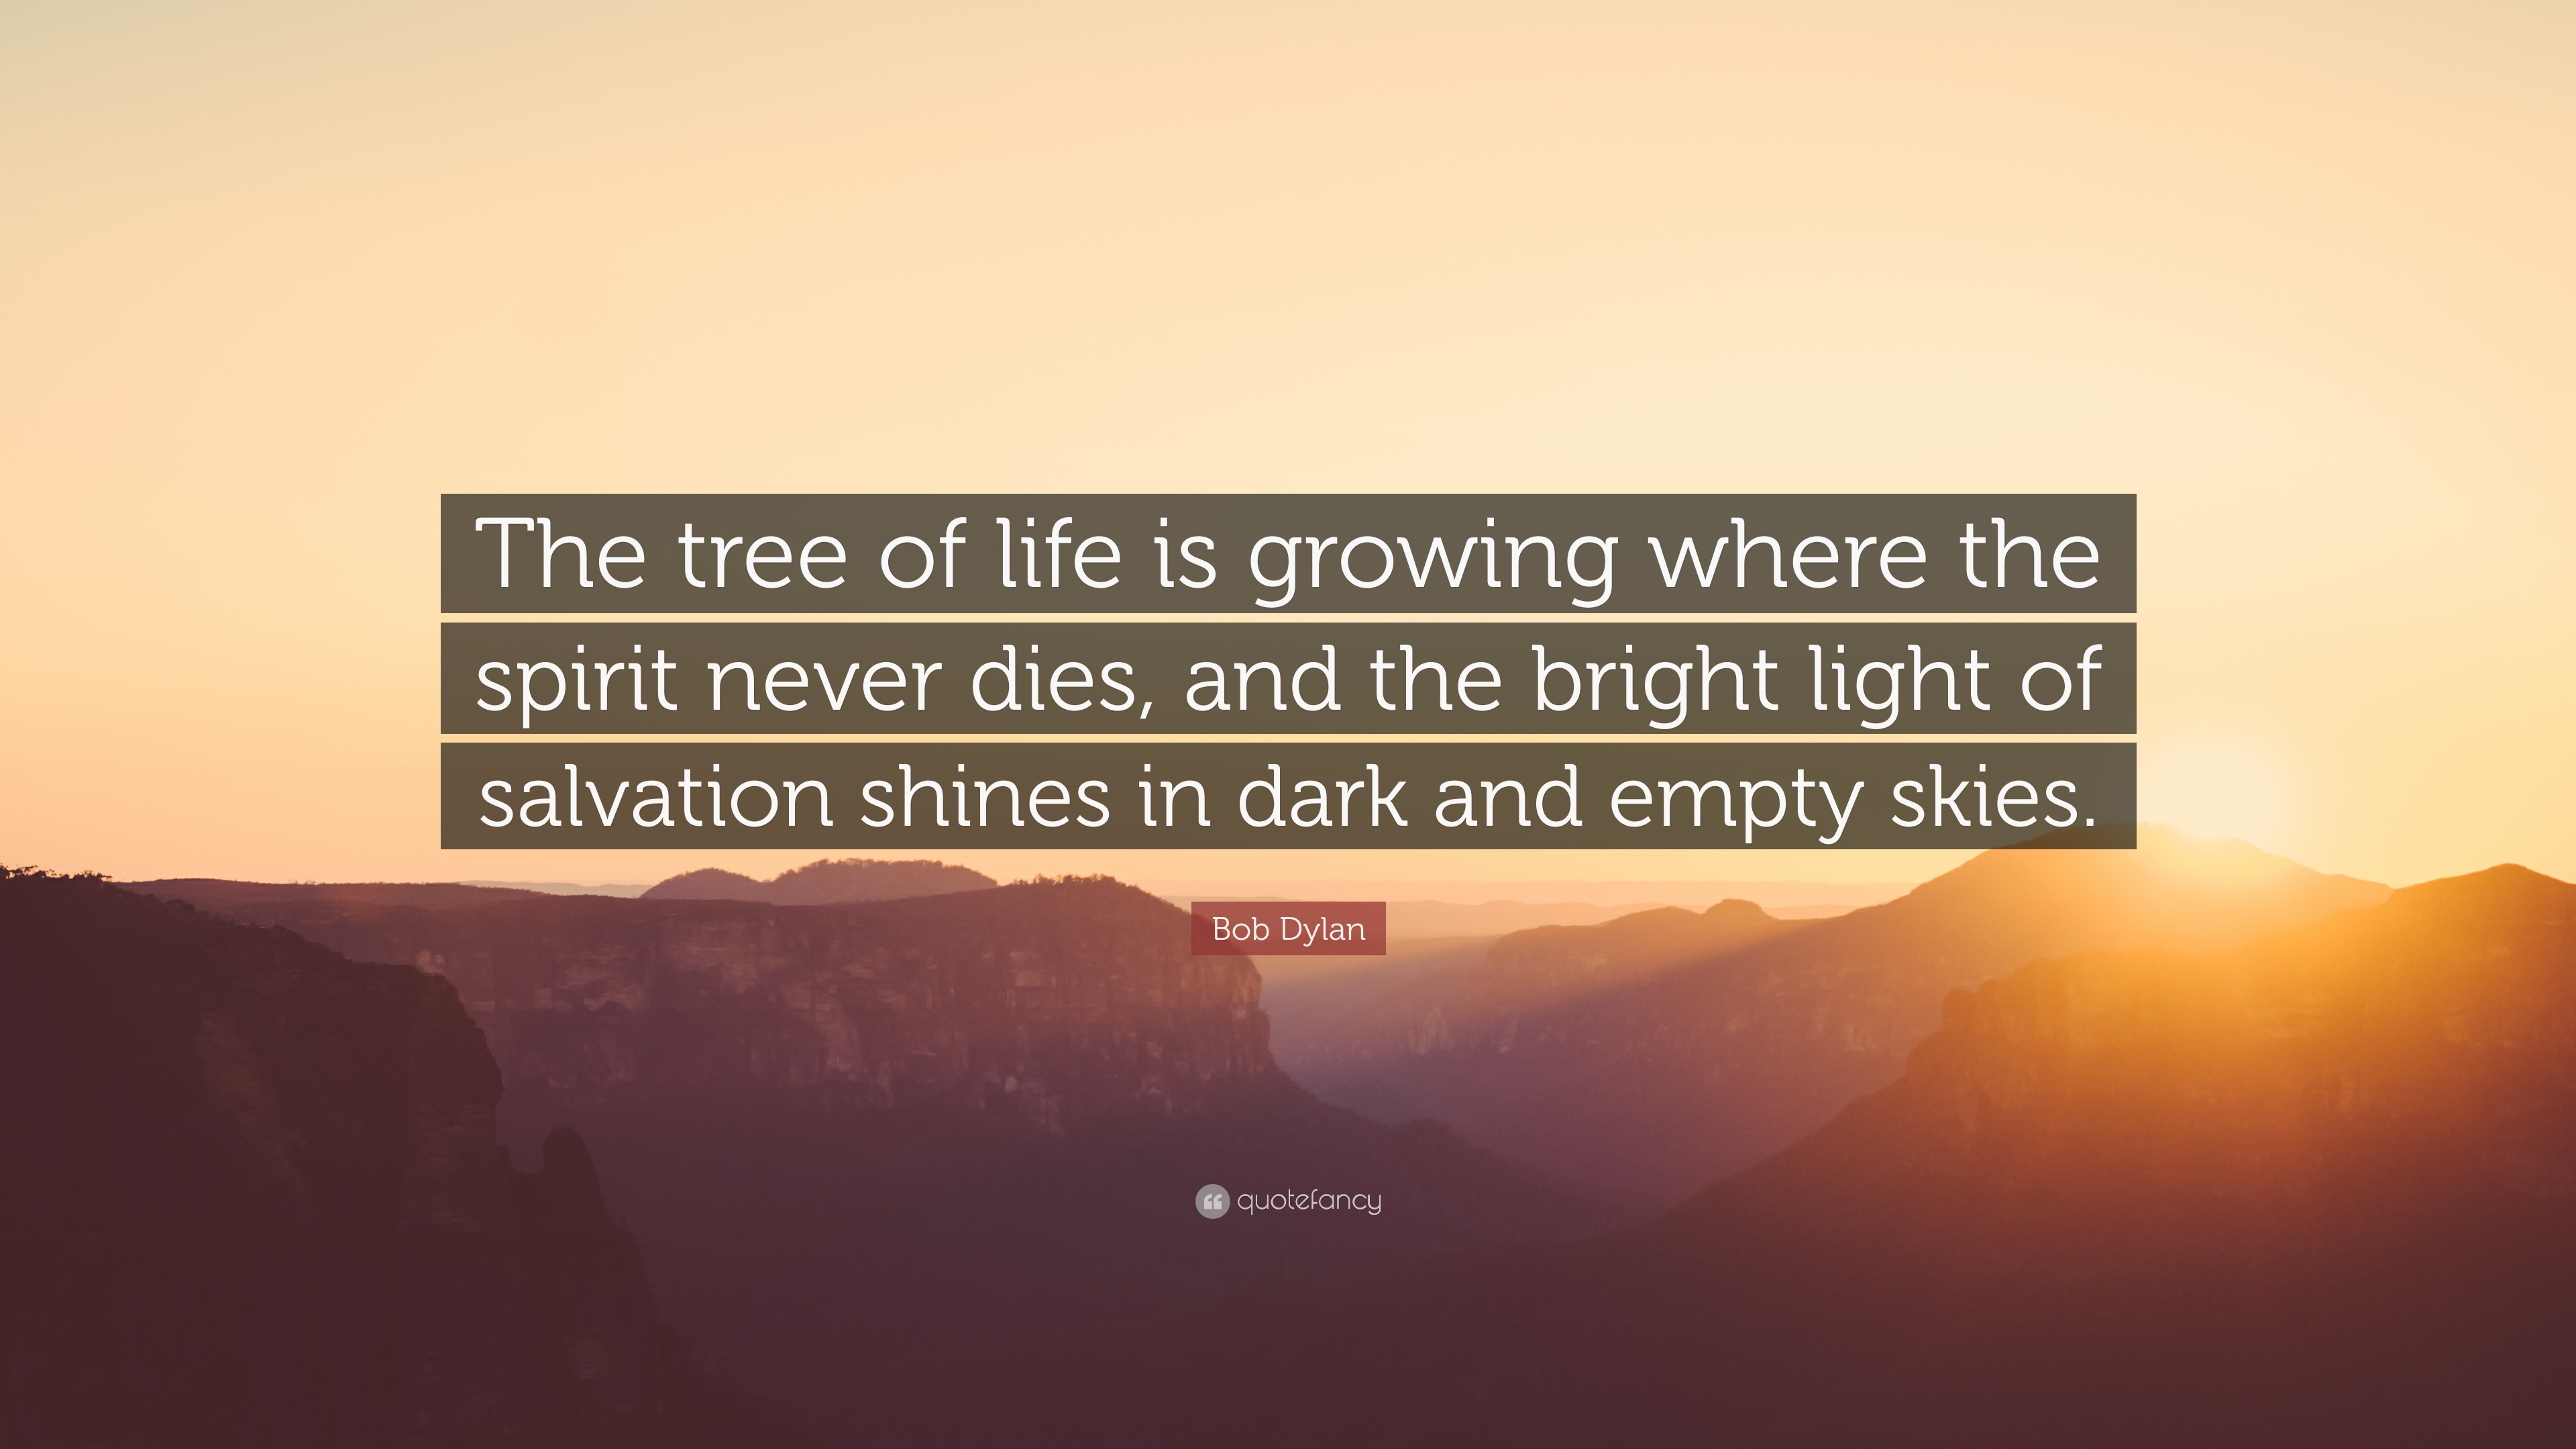 3840x2160 Bob Dylan Quote: “The tree of life is growing where the spirit never dies